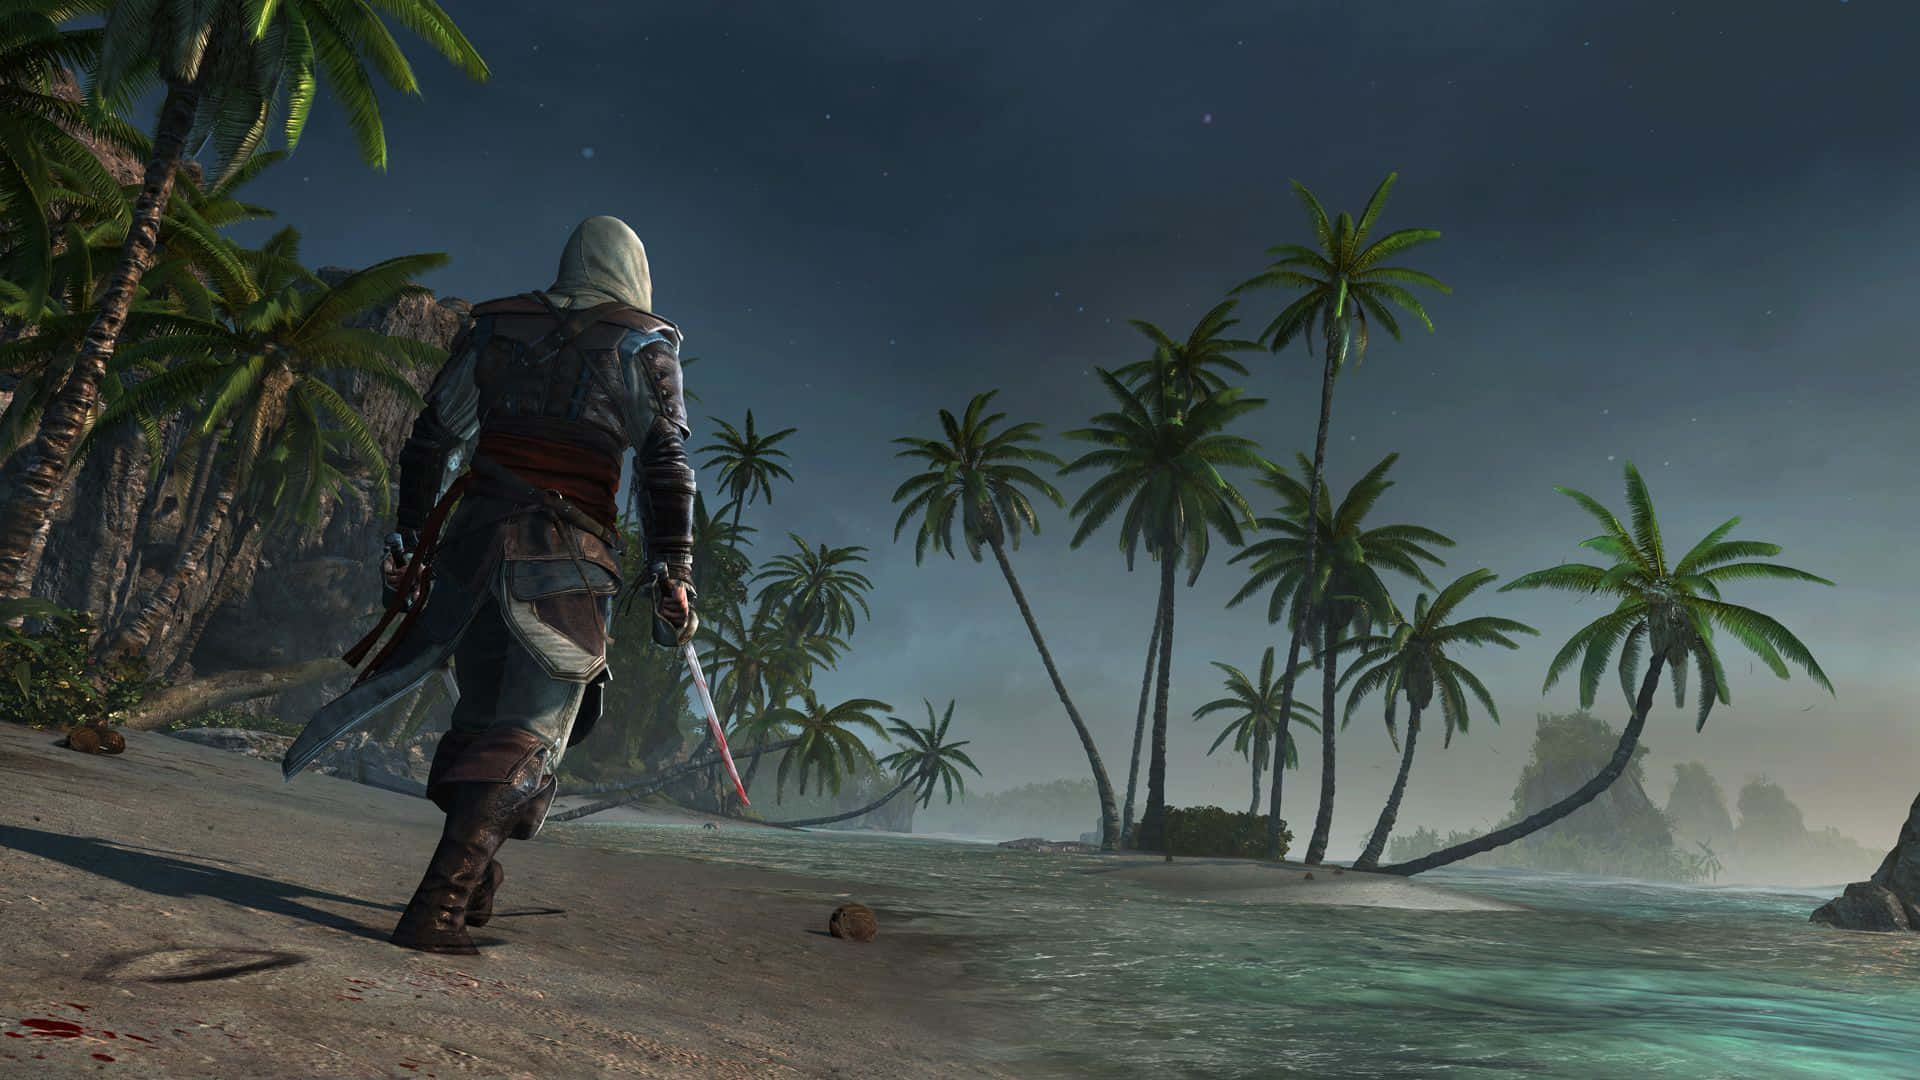 Action-packed Ship Combat in Assassin's Creed 4 Black Flag Wallpaper